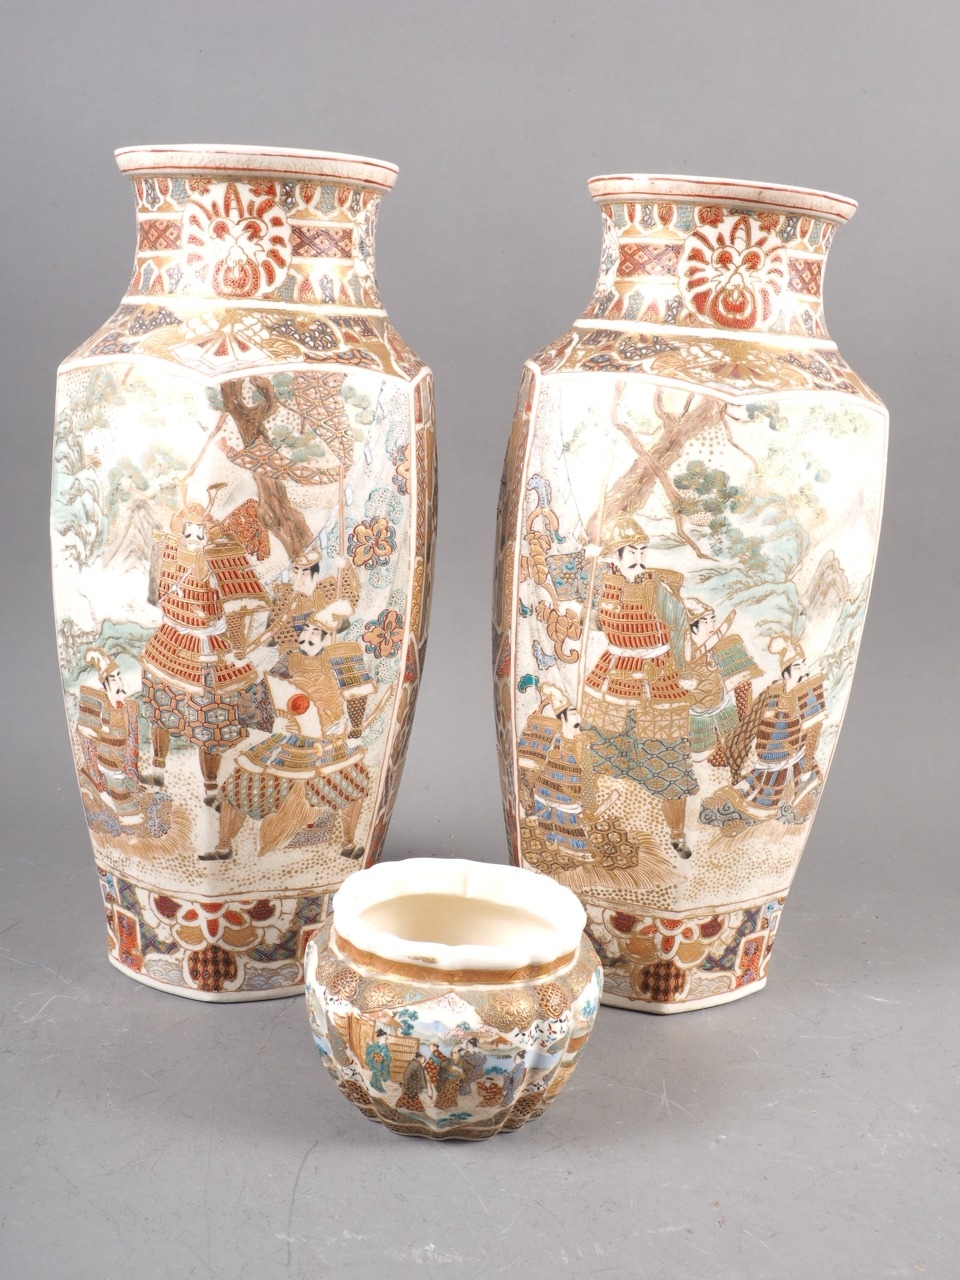 A pair of Japanese Satsuma faceted vases with figure decoration, 11 3/4" high, and a smaller similar